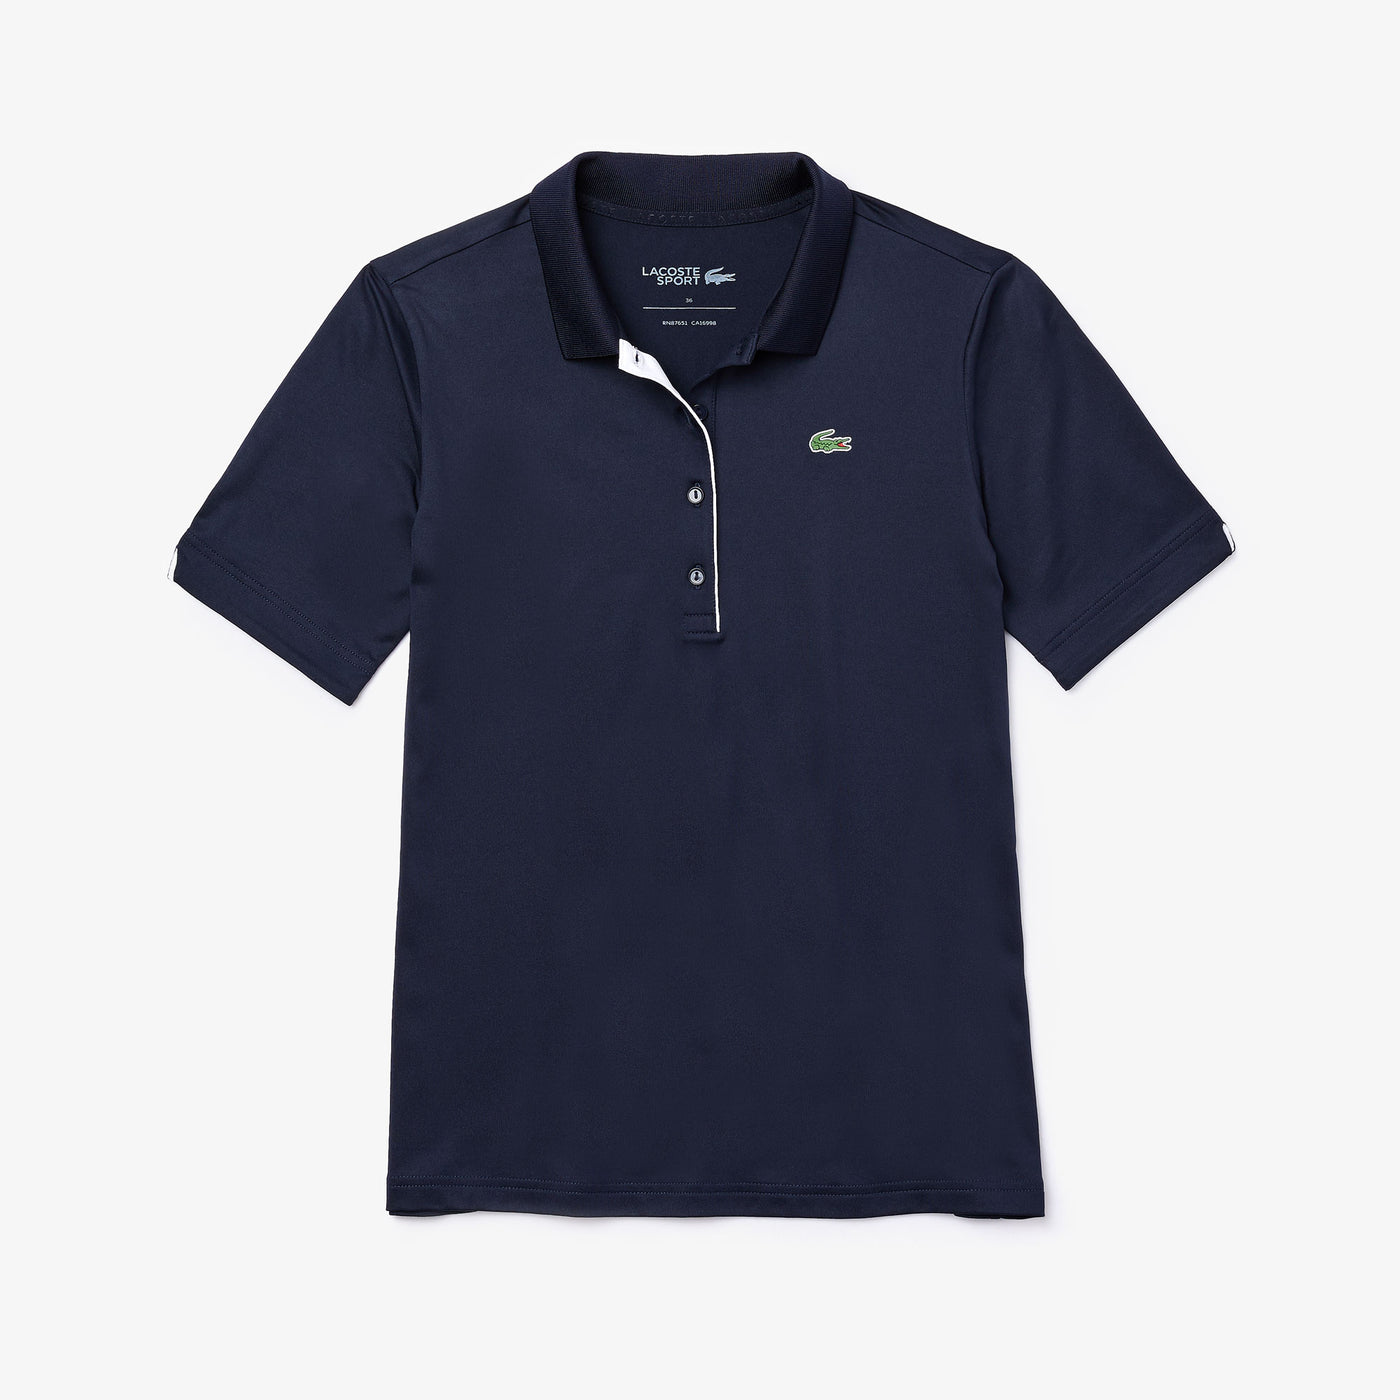 Shop The Latest Collection Of Outlet - Lacoste Women'S Lacoste Sport Breathable Stretch Golf Polo Shirt - Pf5179 In Lebanon